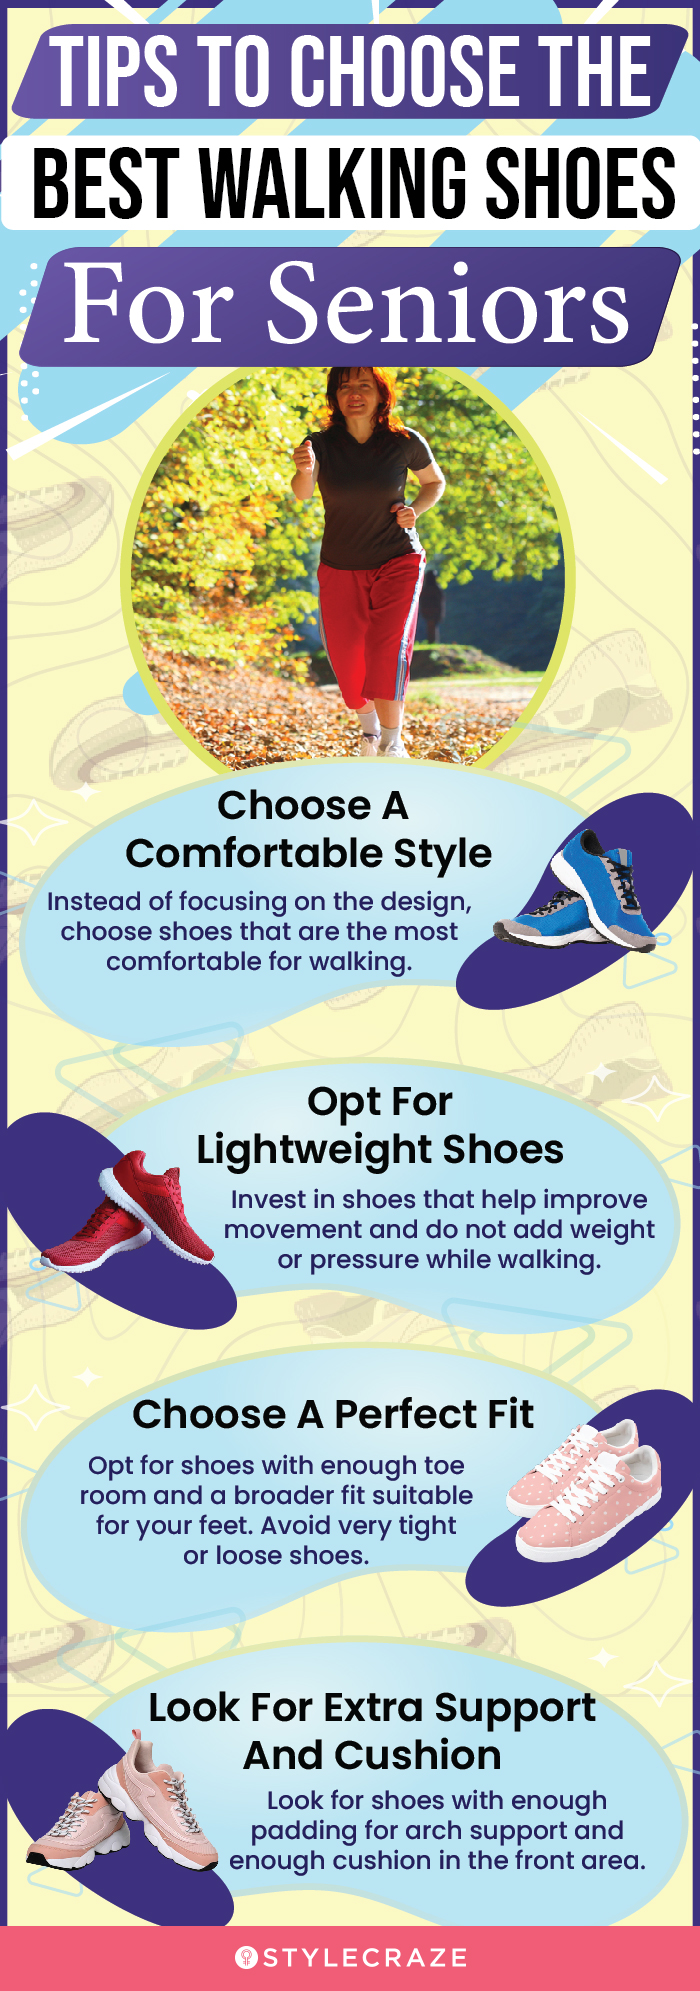 Tips To Choose The Best Walking Shoes For Seniors [infographic]